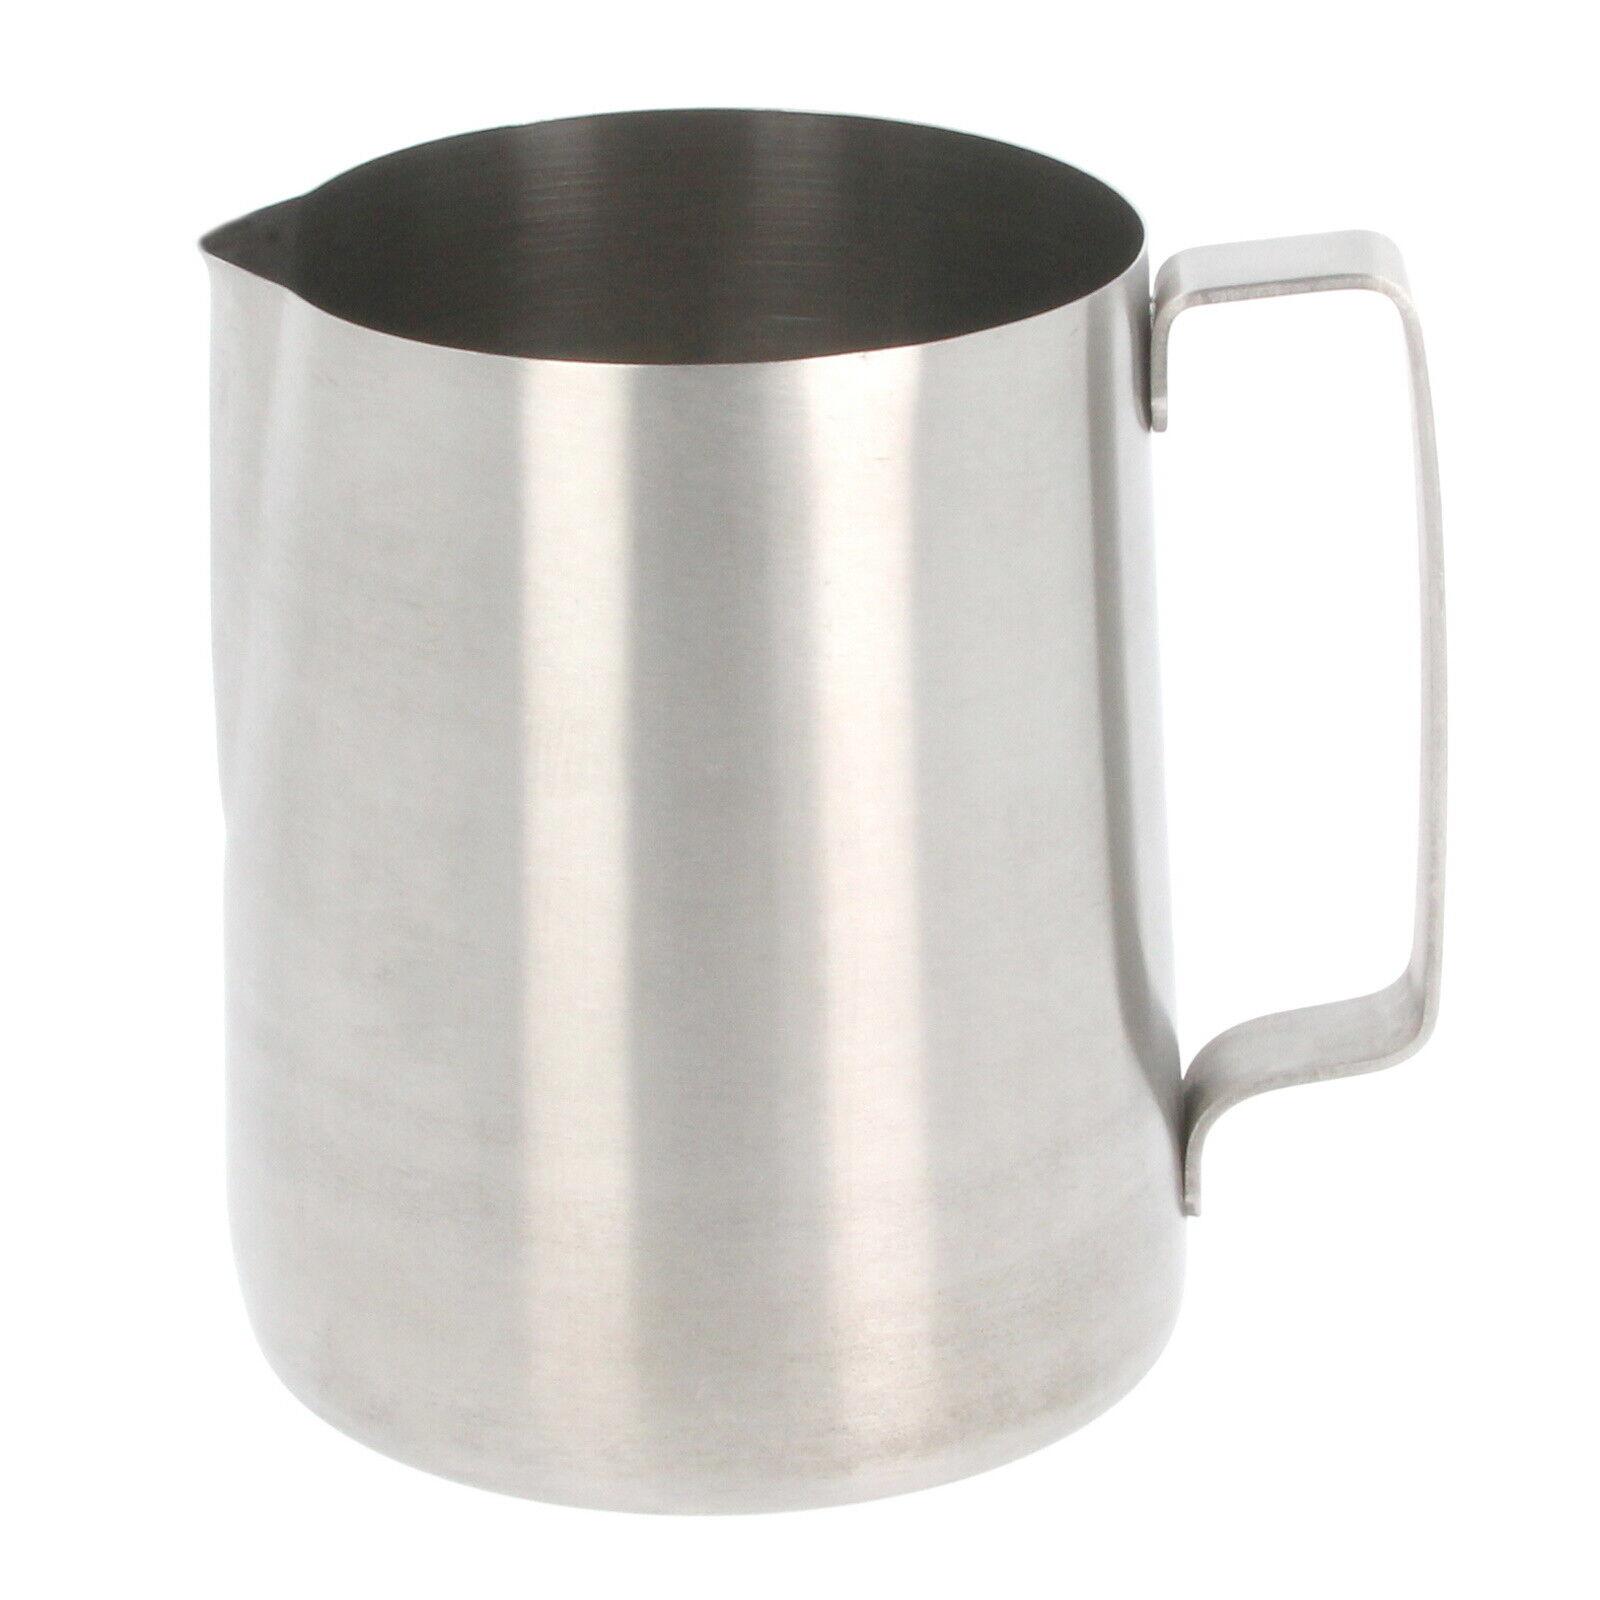 Tea　Metal　Coffee　Frothing　Milk　Pitcher　Latte　Steel　Frother　Jug　Stainless　Gravy